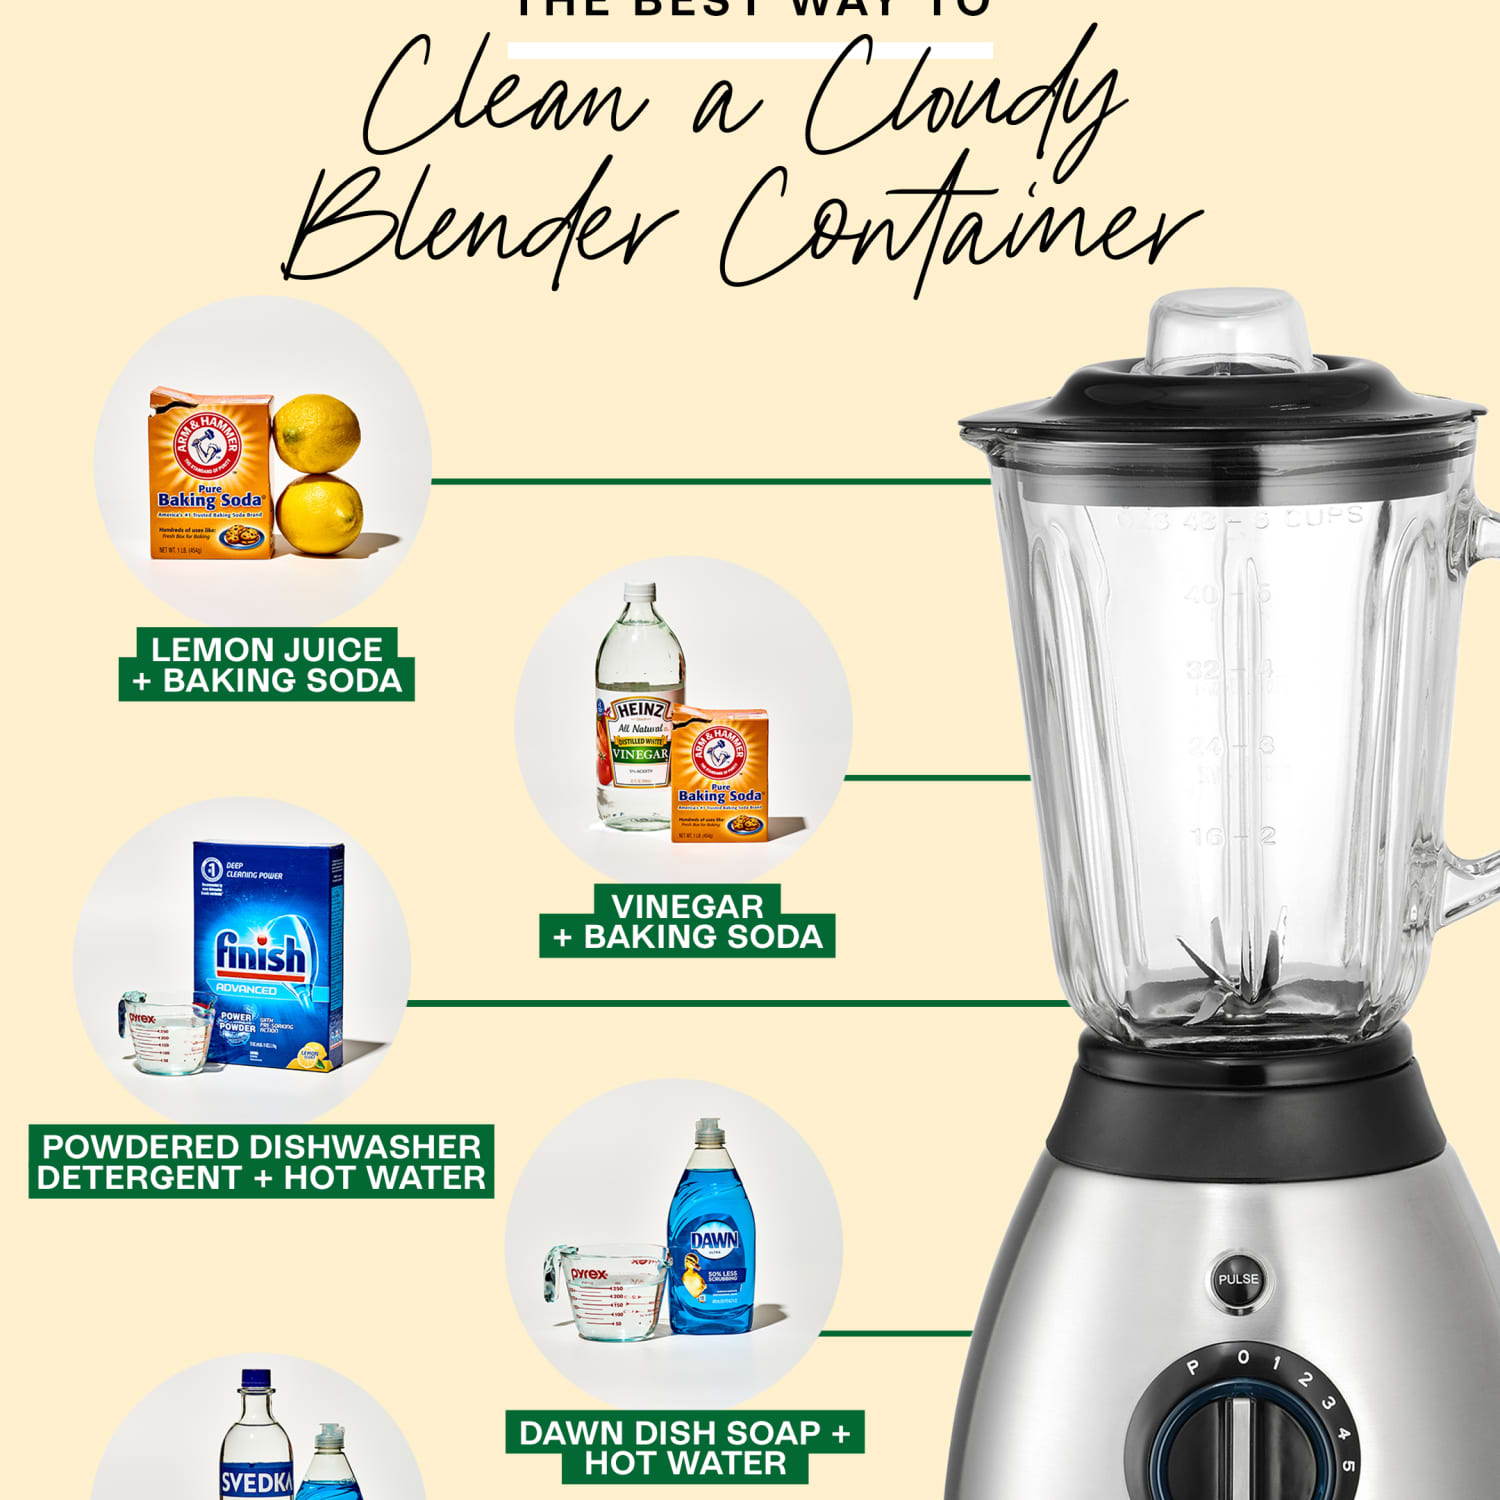 Best Method for Cleaning a Cloudy Blender Container